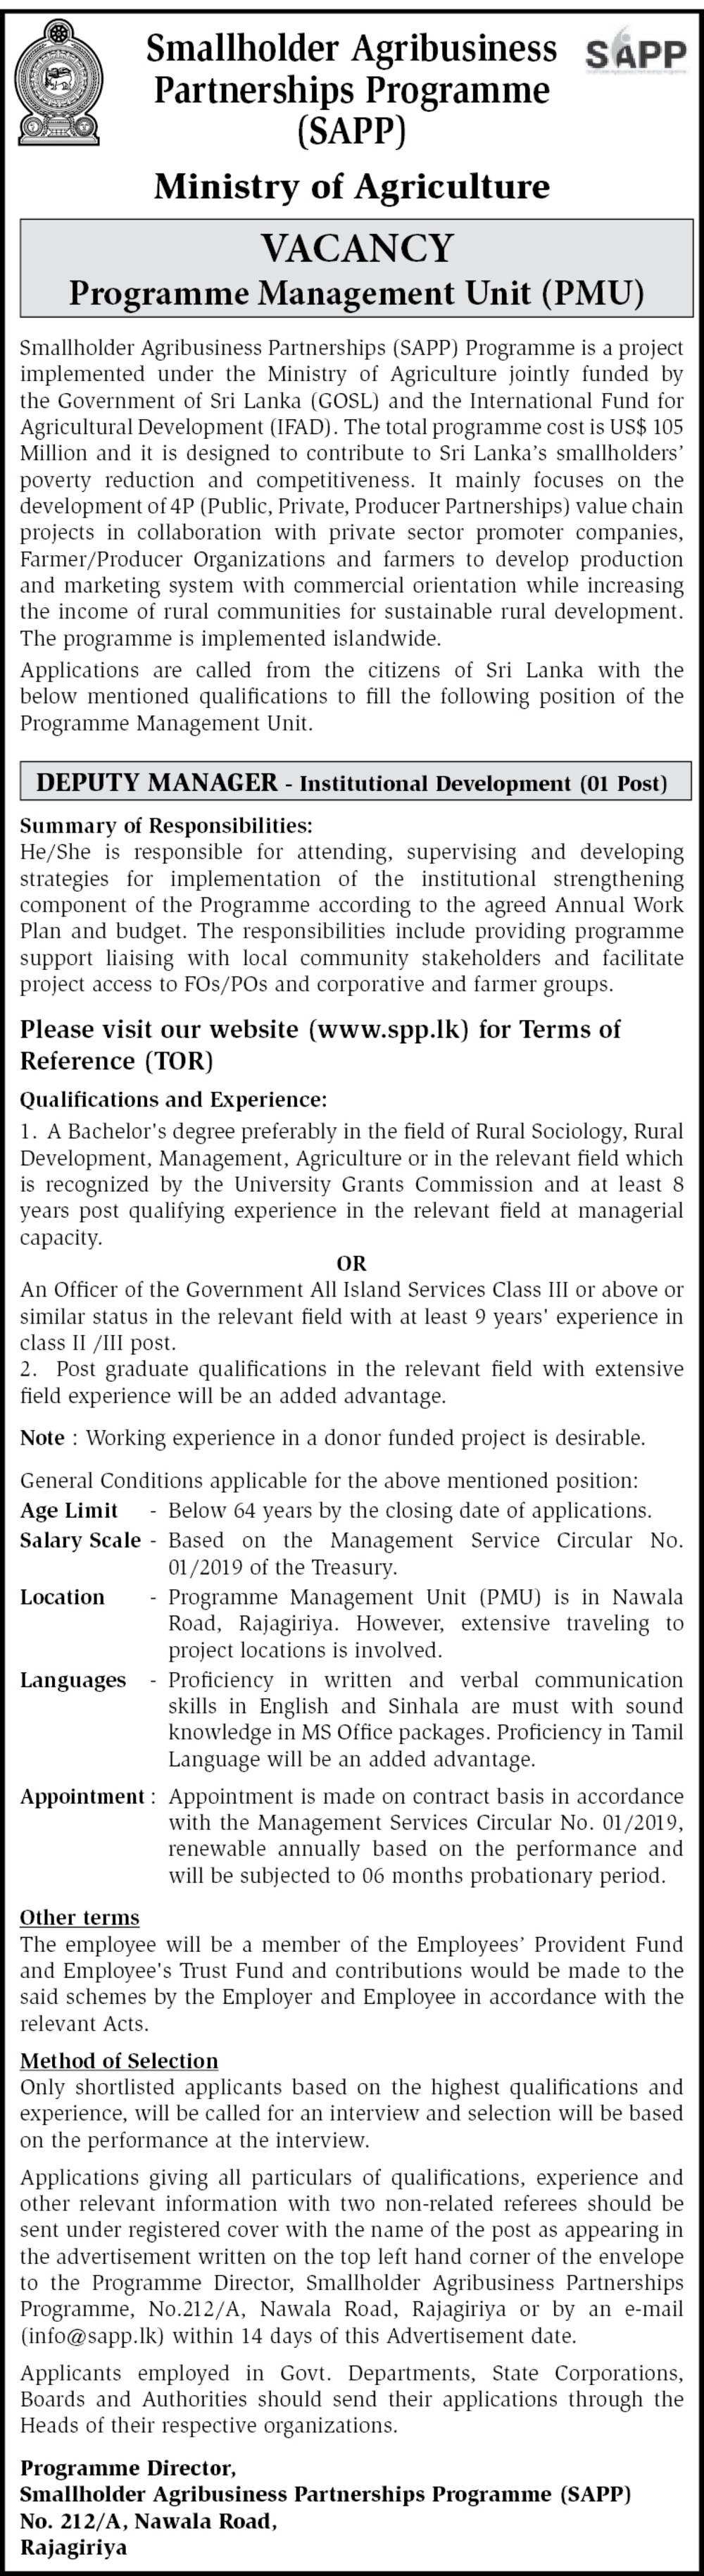 Deputy Manager Job Vacancy in Ministry of Agriculture English Details